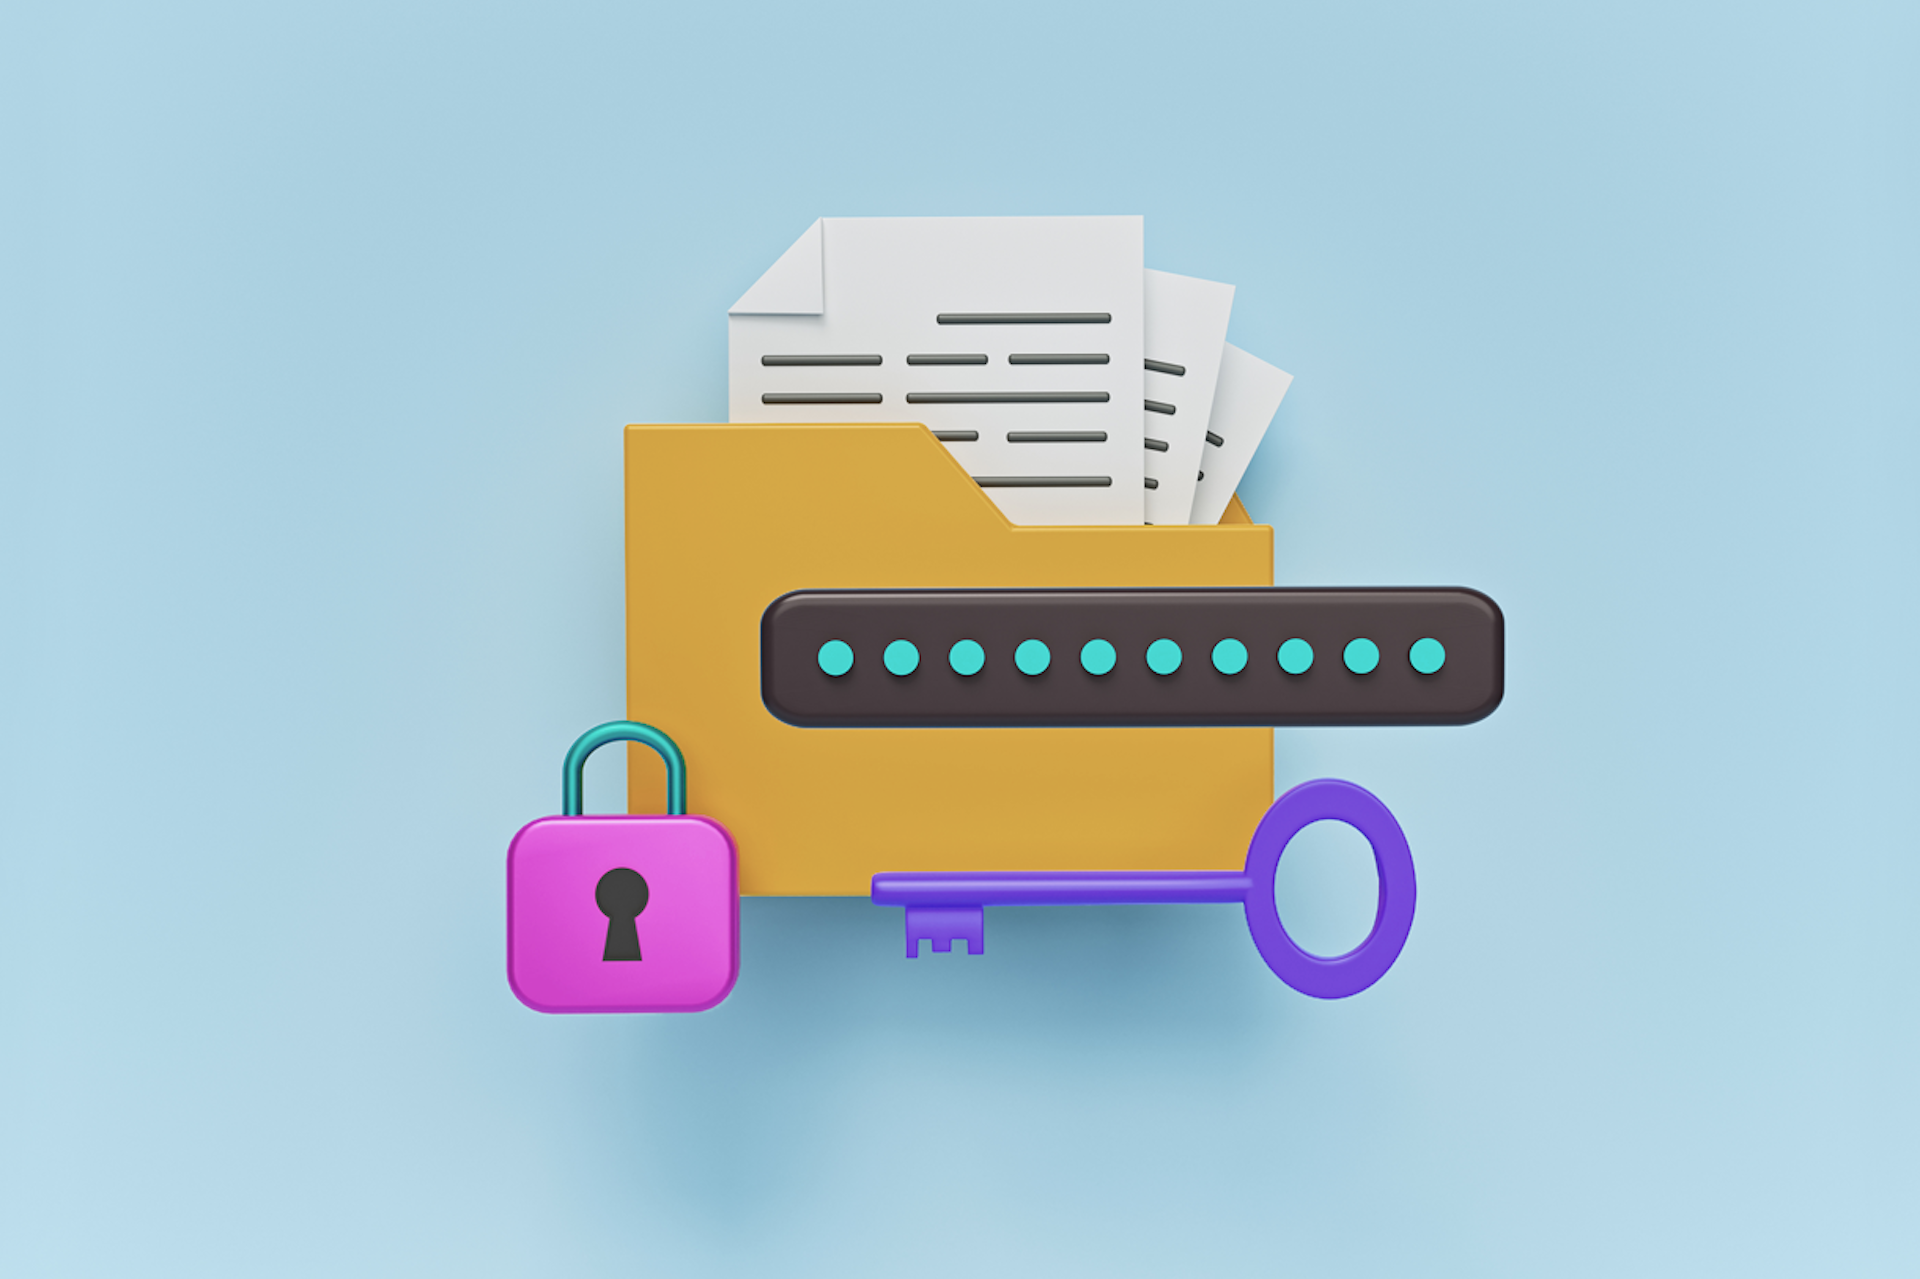 A lock, key, and loading symbol in front of a file folder with papers coming out, for a blog about master data management.